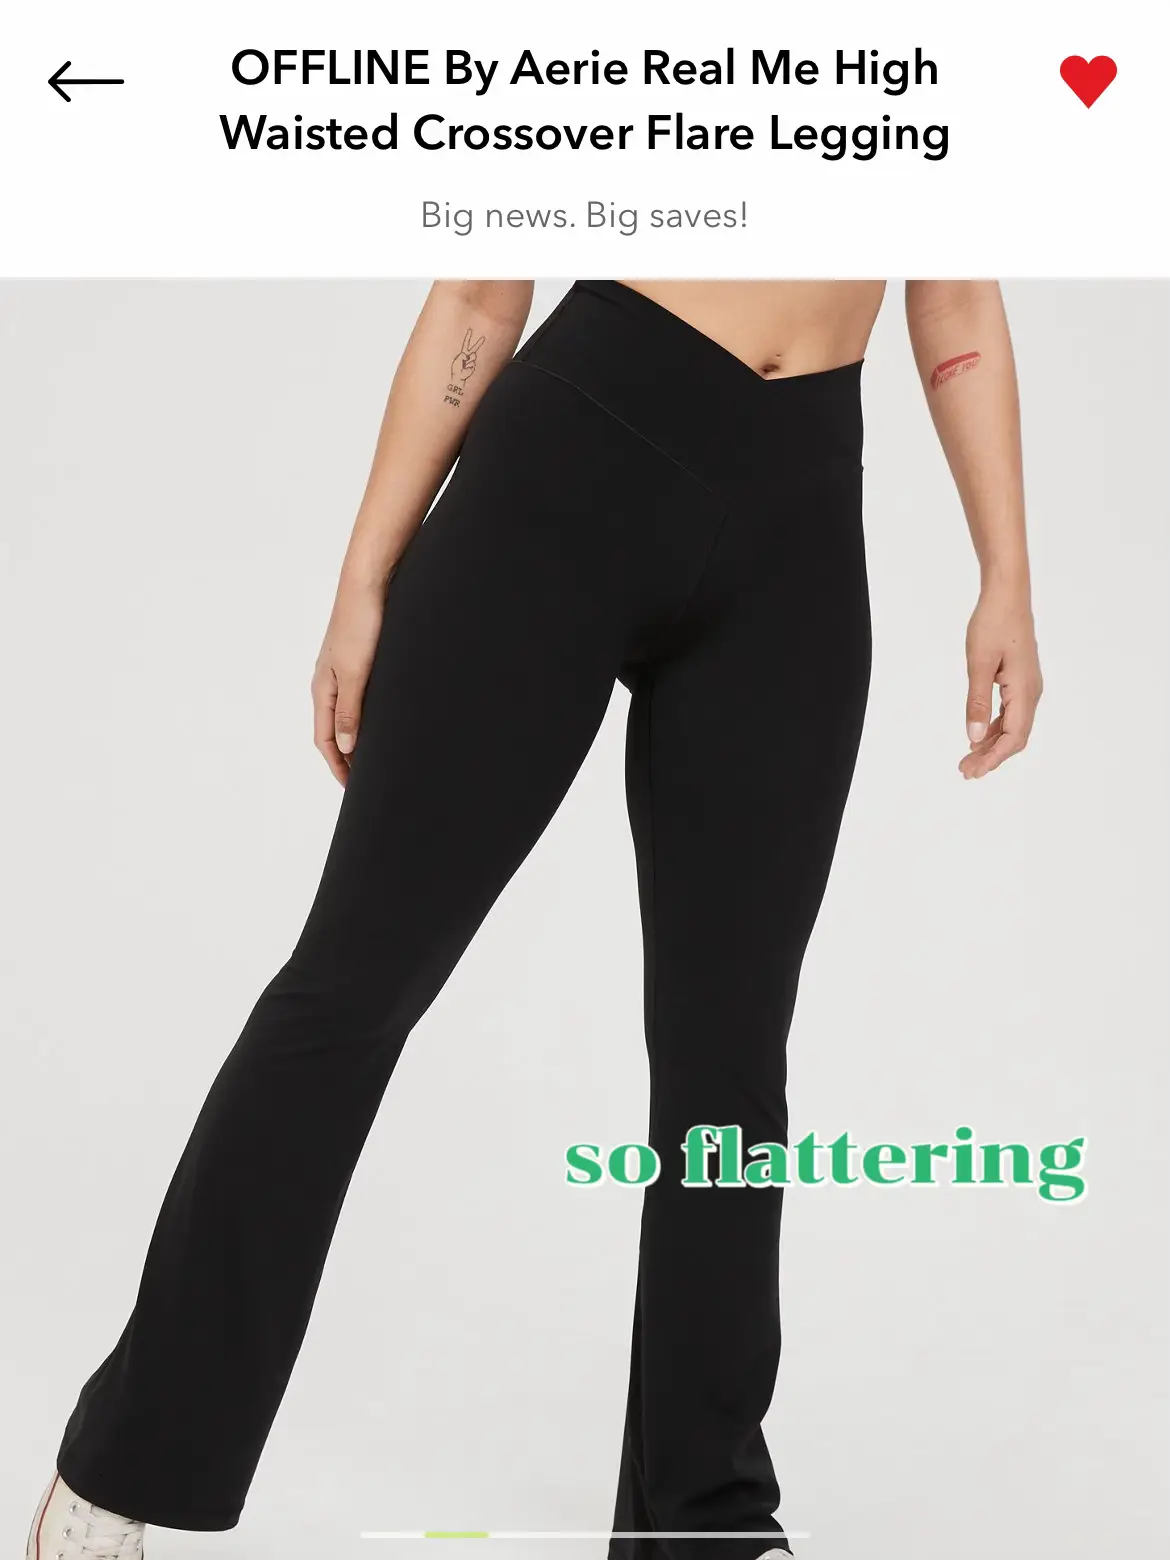 19 top Offline by Aerie Real Me Double Crossover Flare Legging ideas in 2024